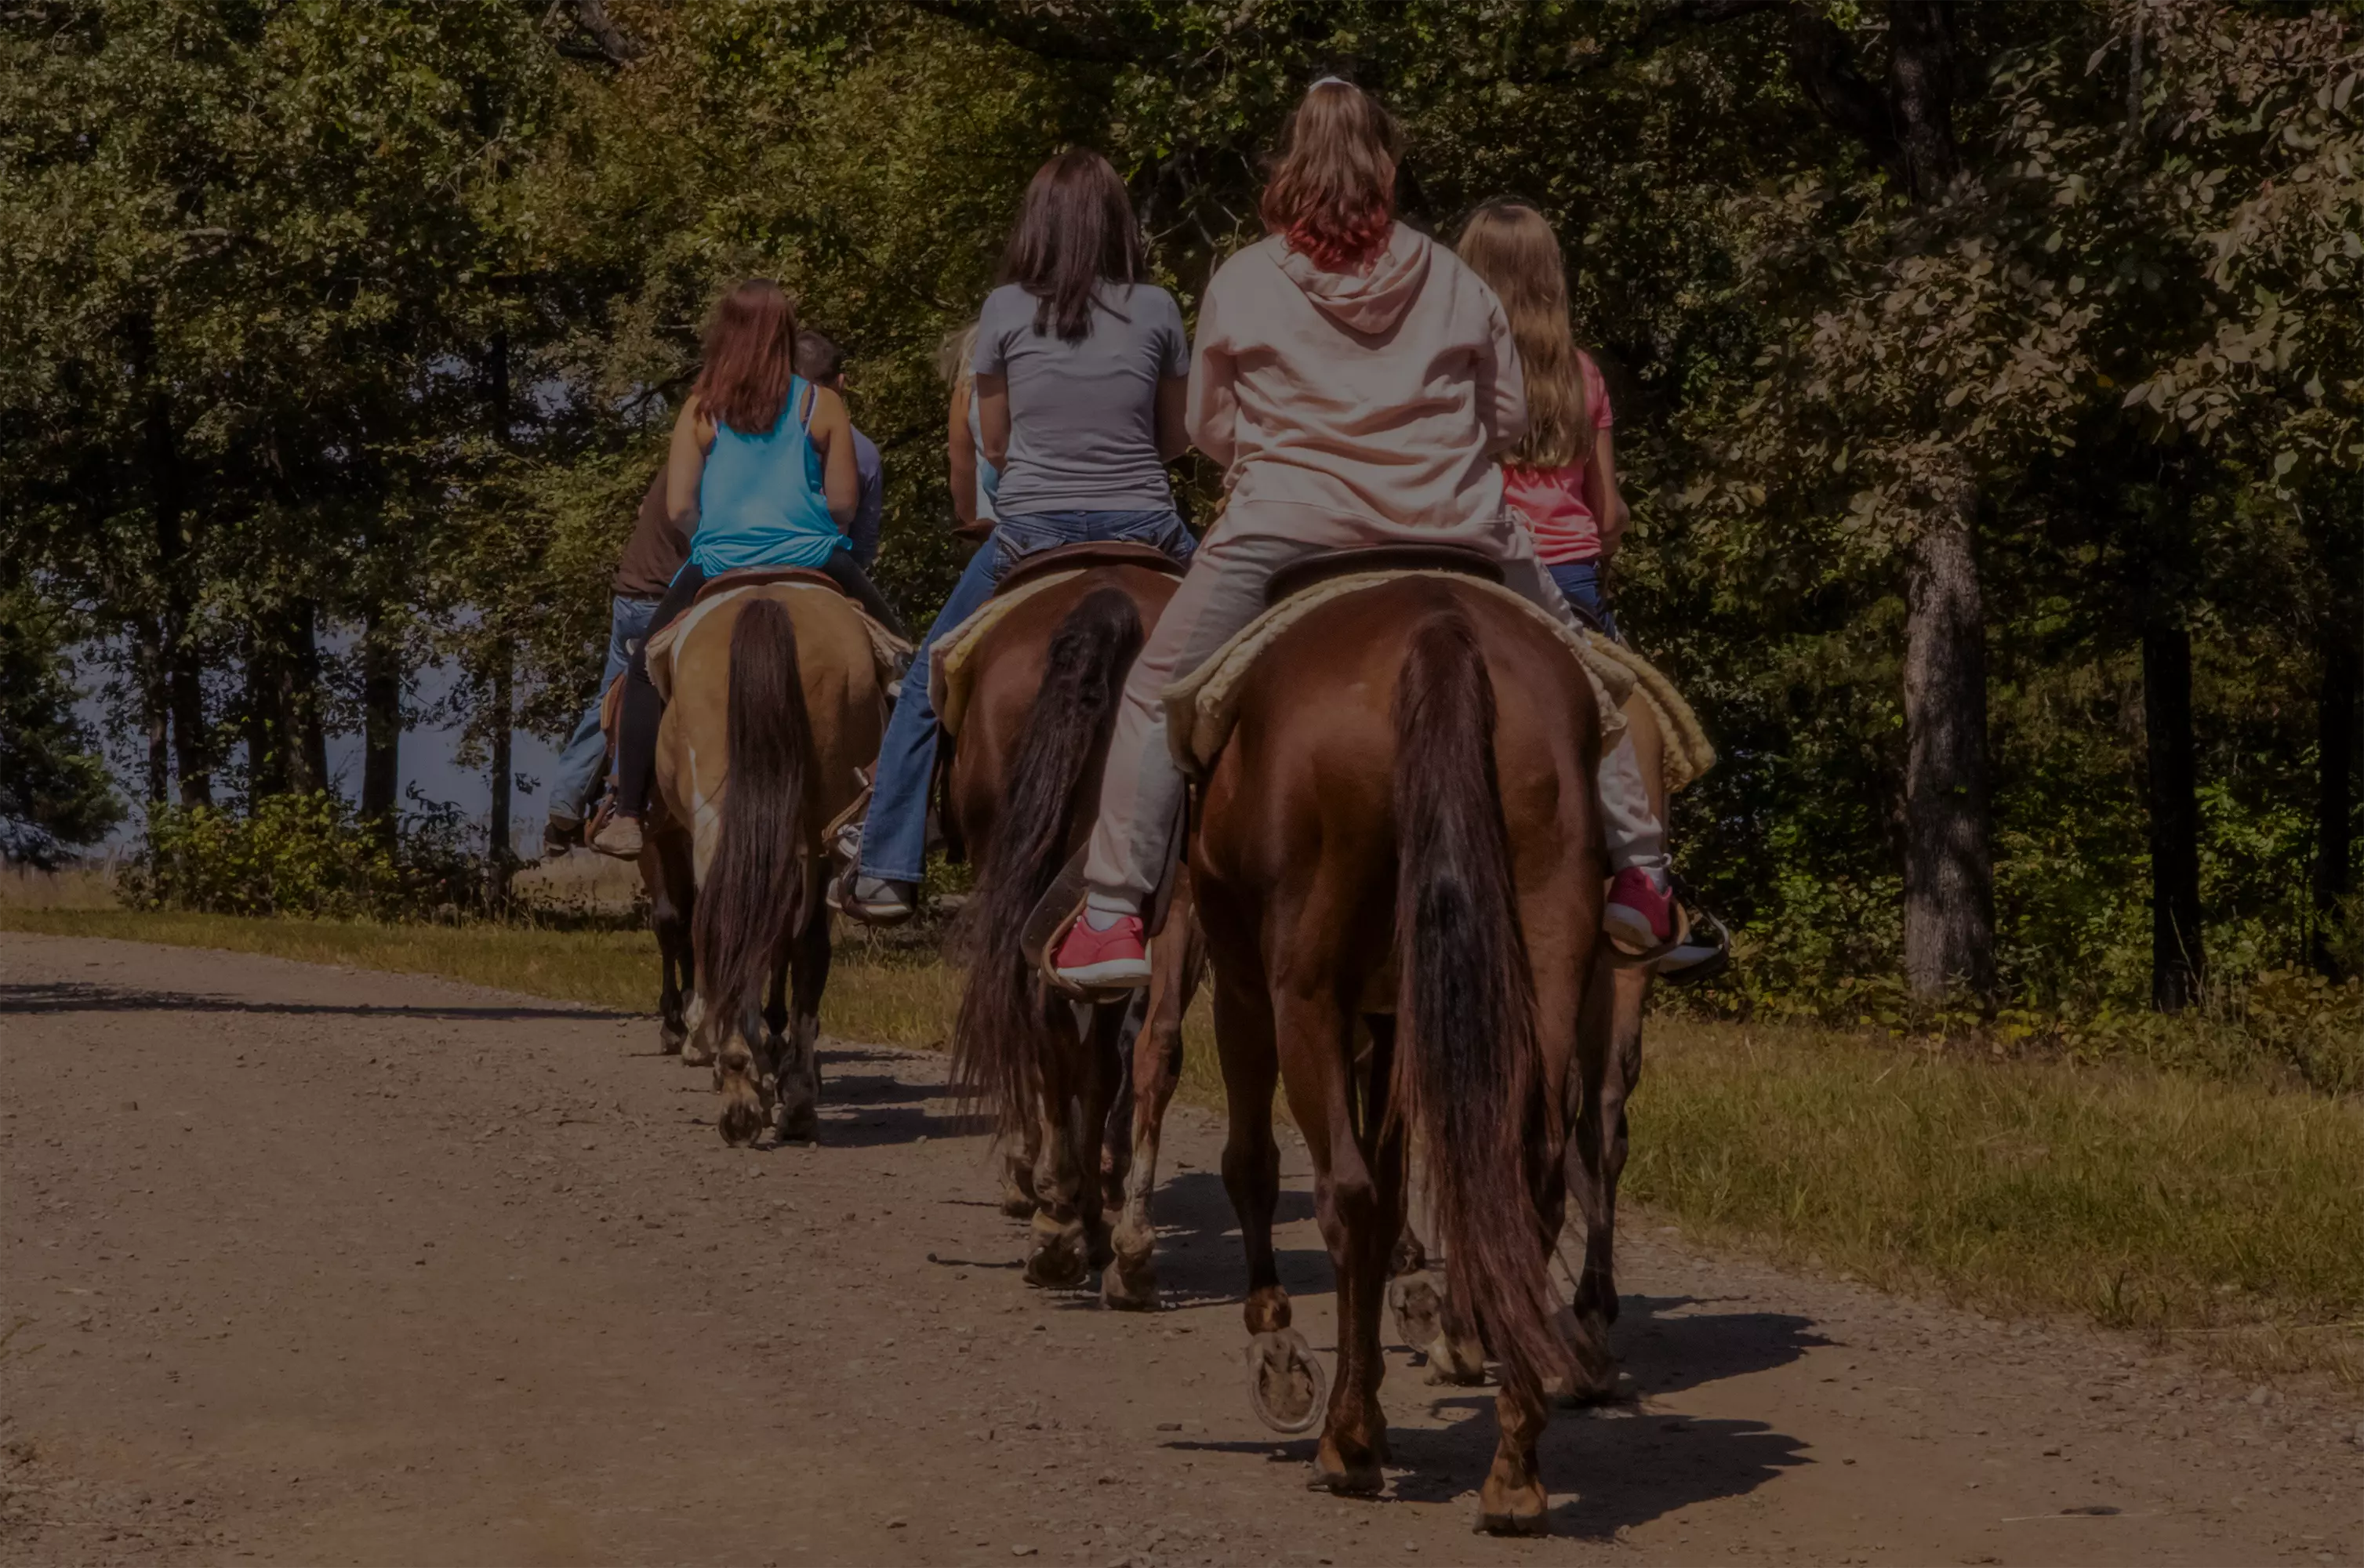 group of people horseback riding down dirt path